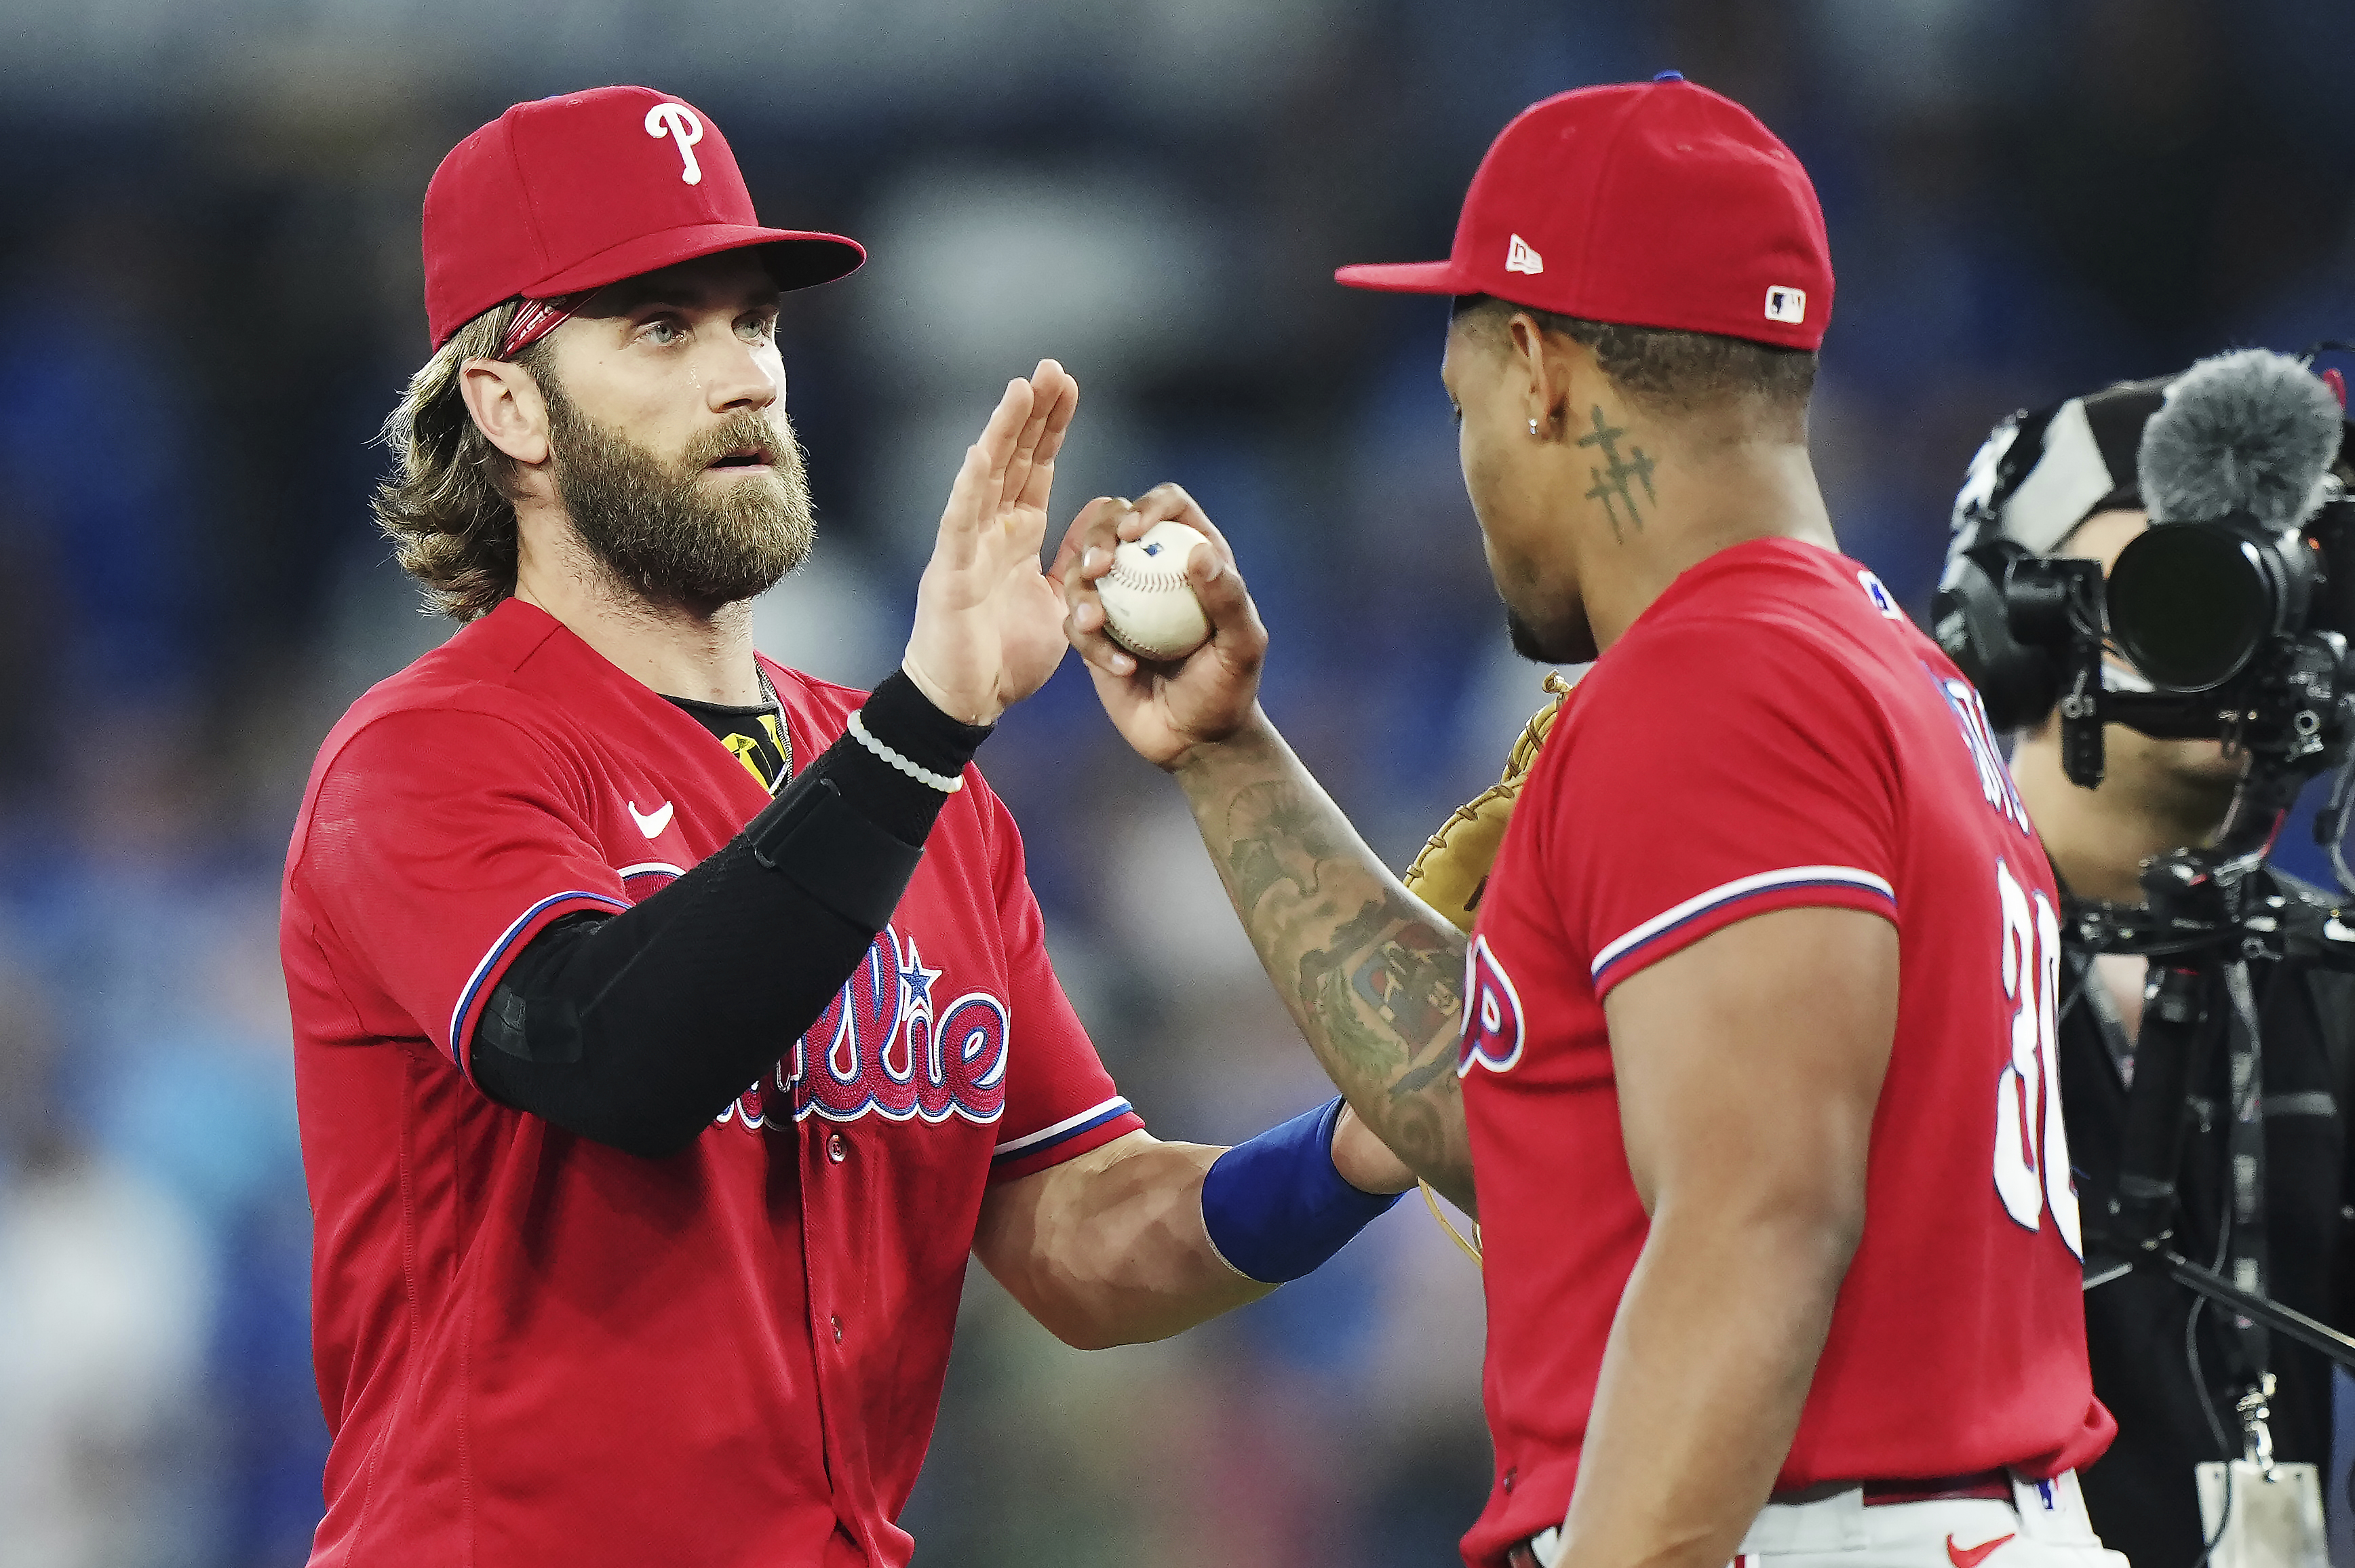 Harper hits 2 solo home runs, Nola pitches 5 innings in Phillies